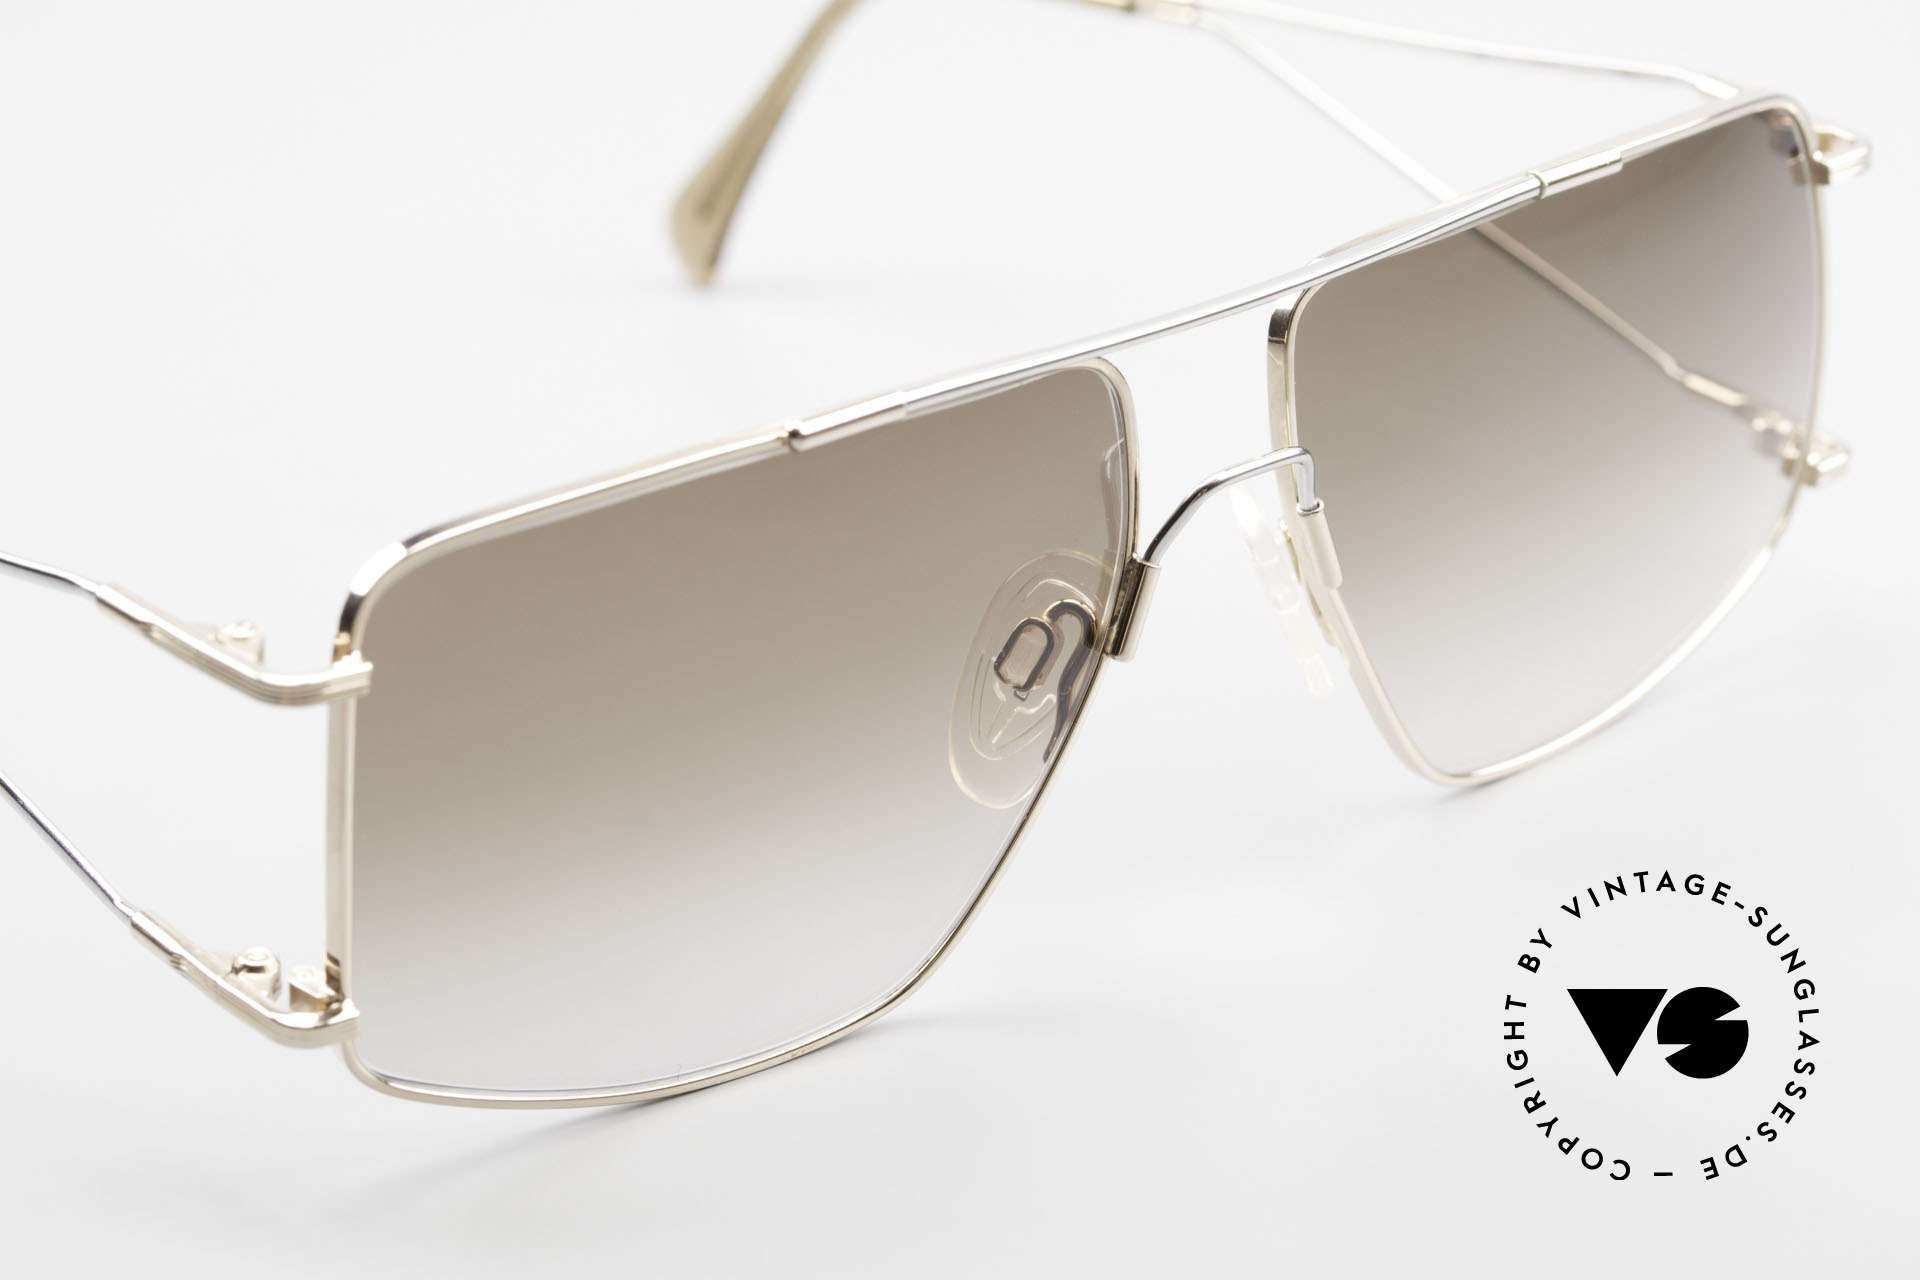 Neostyle Jet 40 Titanflex Vintage Sunglasses, the so called 'MEMORY EFFECT' is simply ingenious, Made for Men